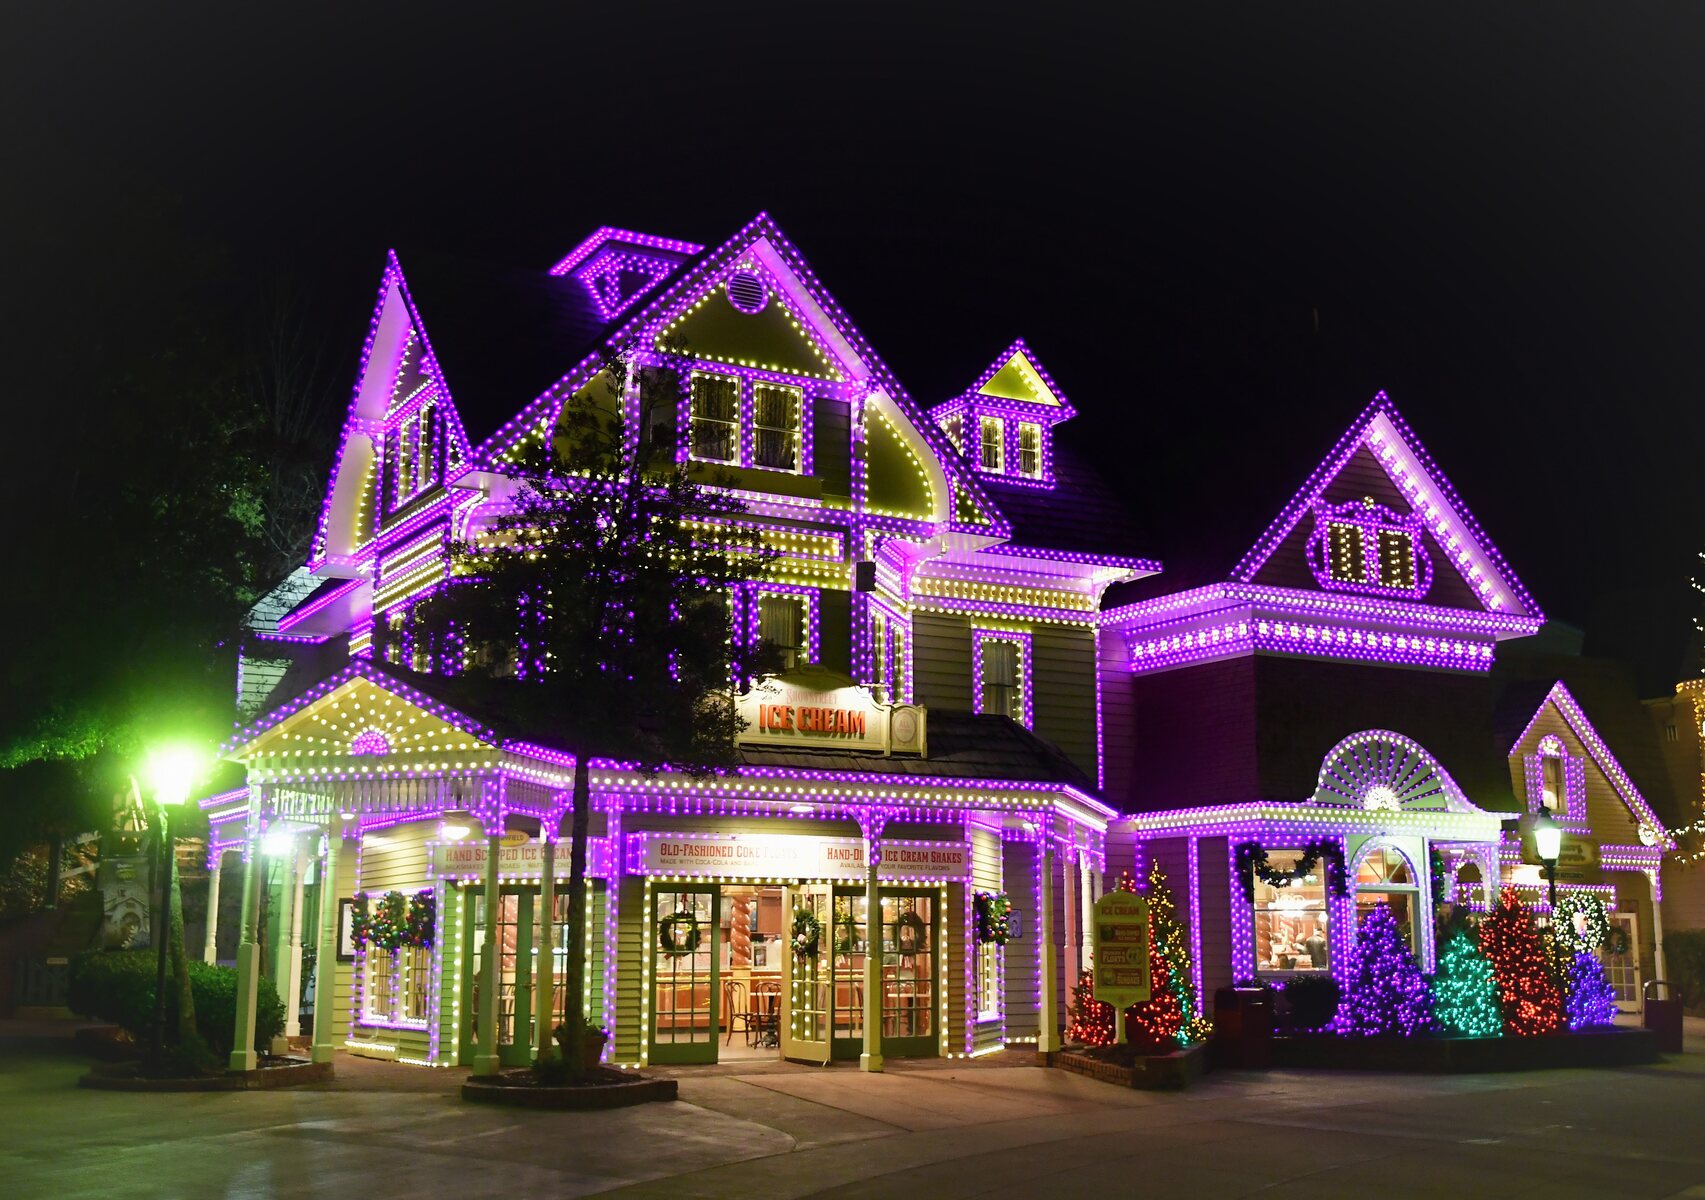 19 Facts About Dollywood's Smoky Mountain Christmas